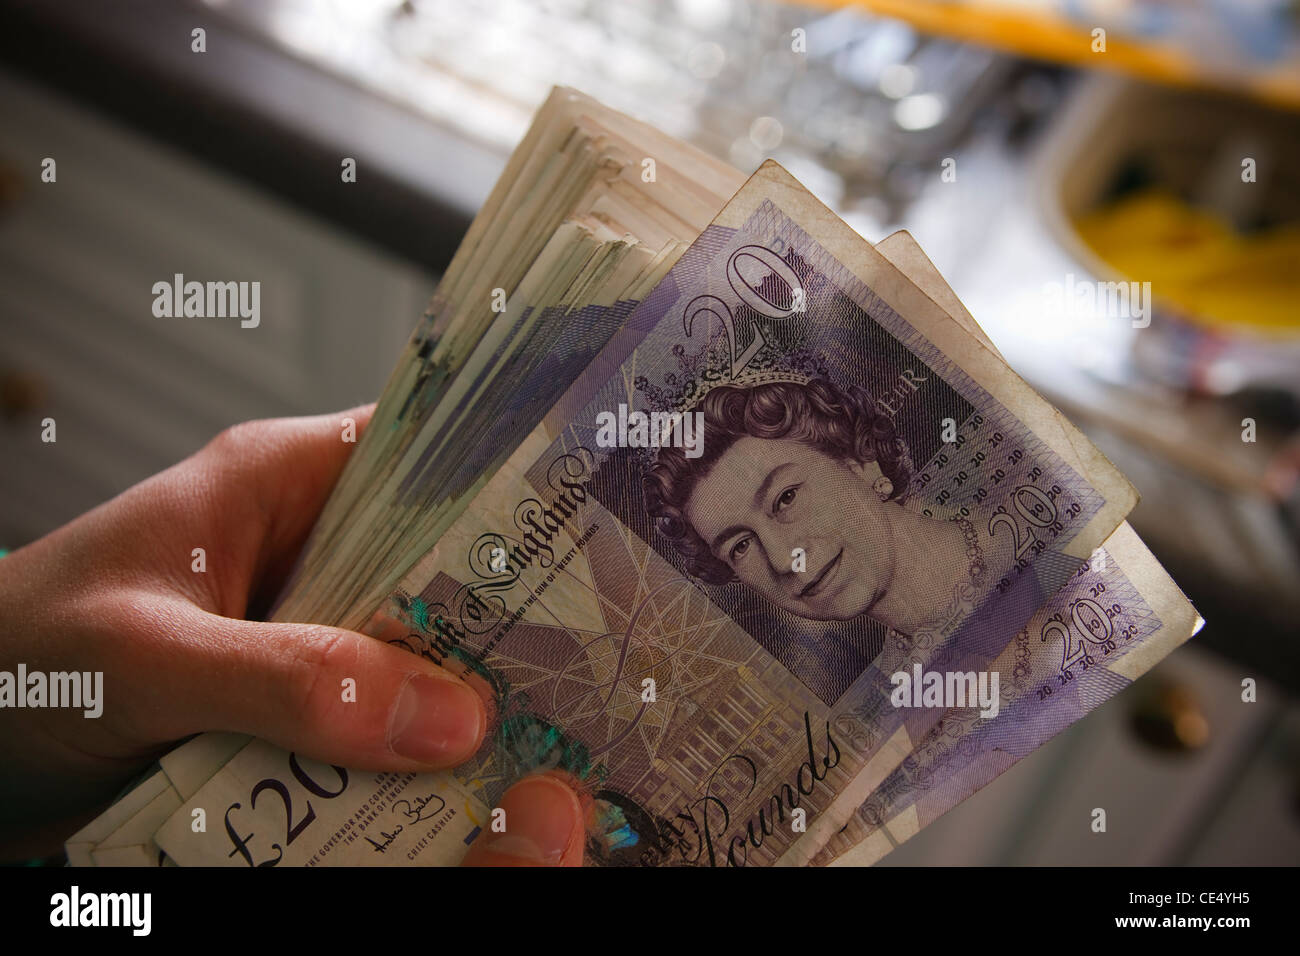 holding fan money £20 notes GBR sterling currency view landscape young man teenager model released hands stash wad Stock Photo